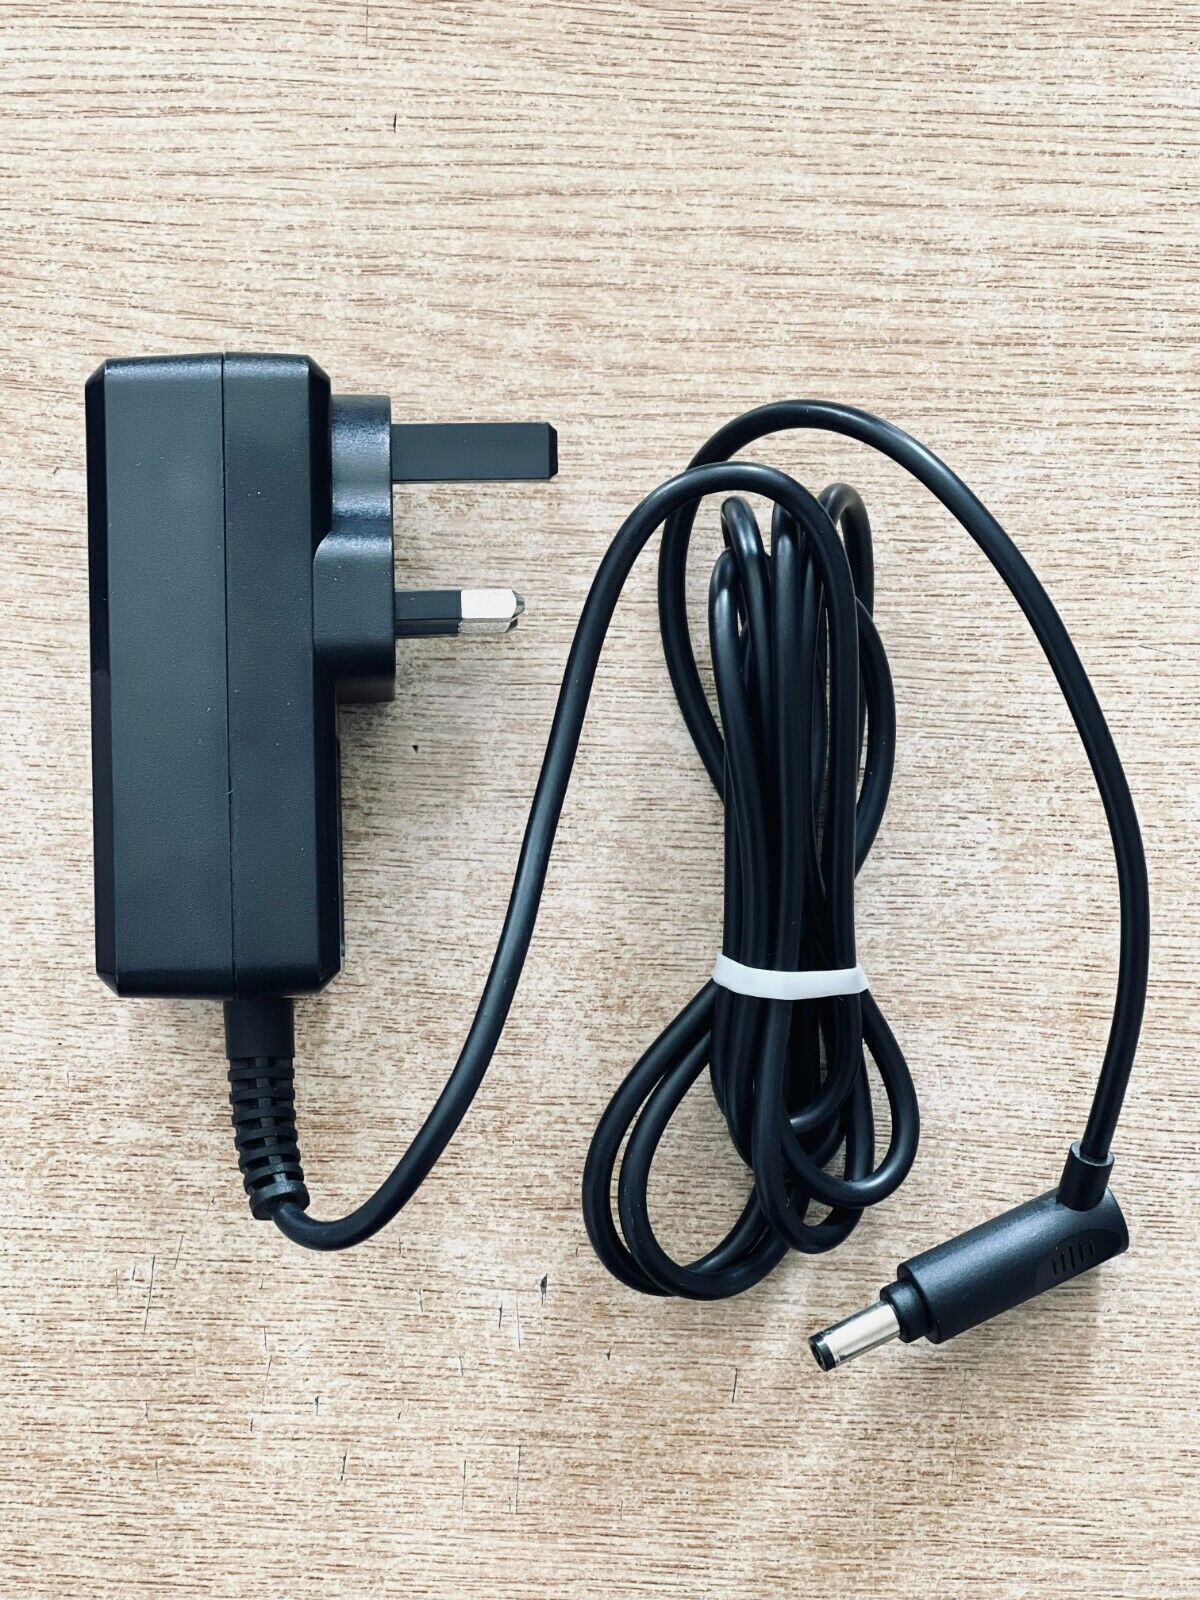 *Brand NEW*for CELLO T1144 10.1" Tablet PC 5V 2A AC Adaptor Power Supply Charger